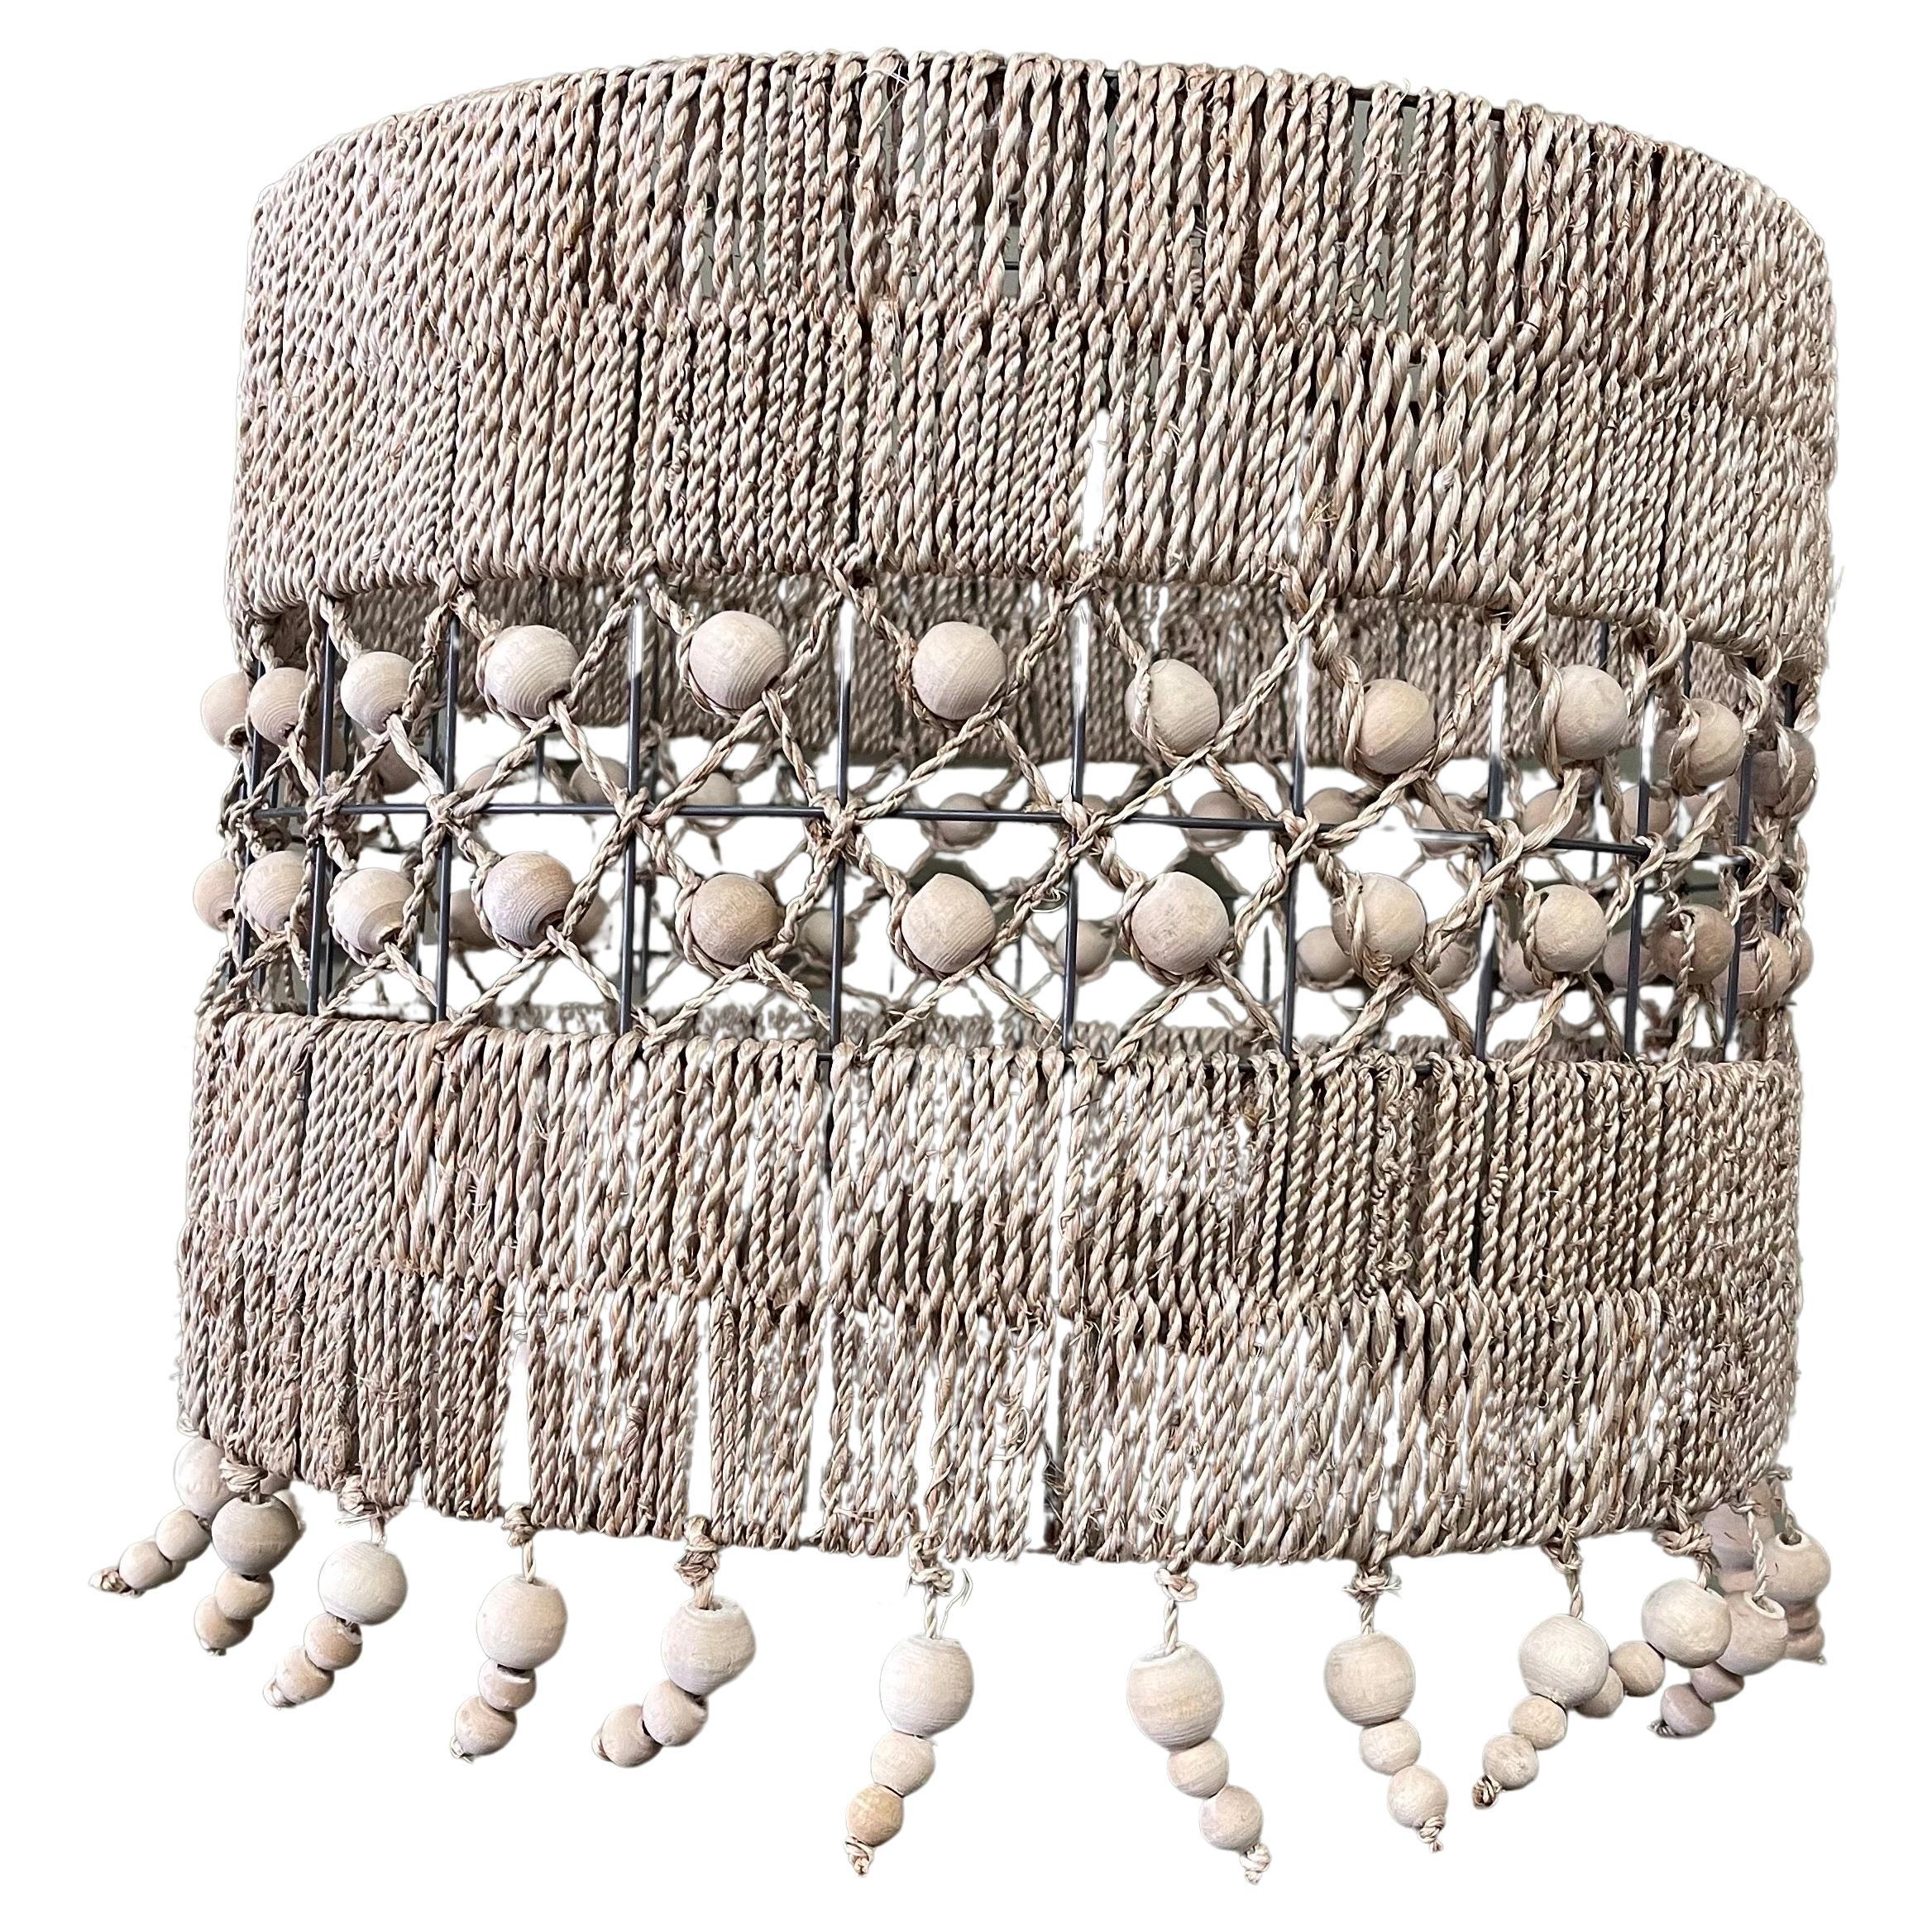 Cool Bohemian Cord and Wood Beads Drum Lamp Shade